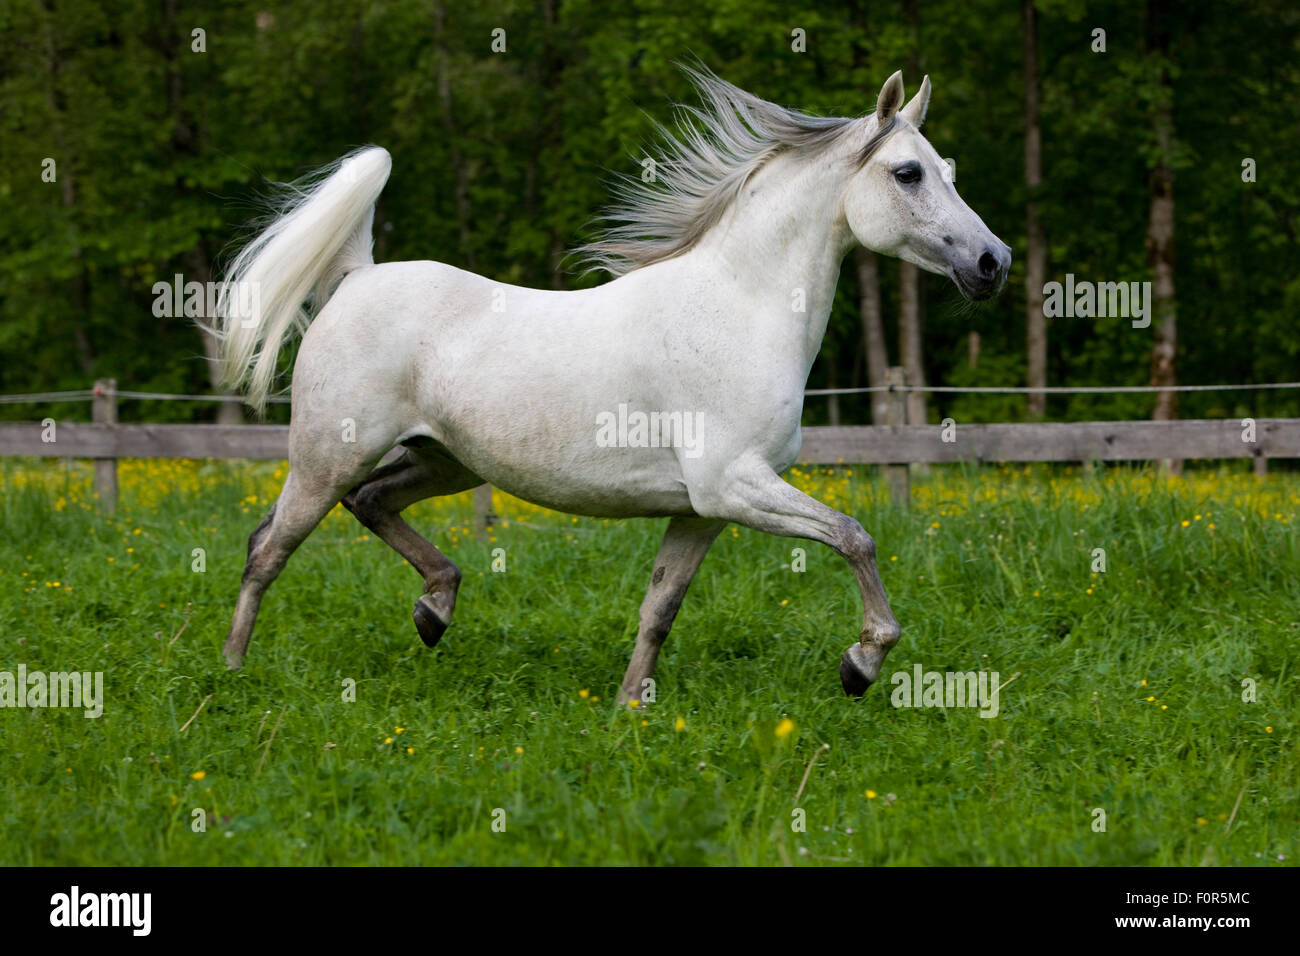 Thoroughbred Arabian horse, white, trotting in a meadow Stock Photo